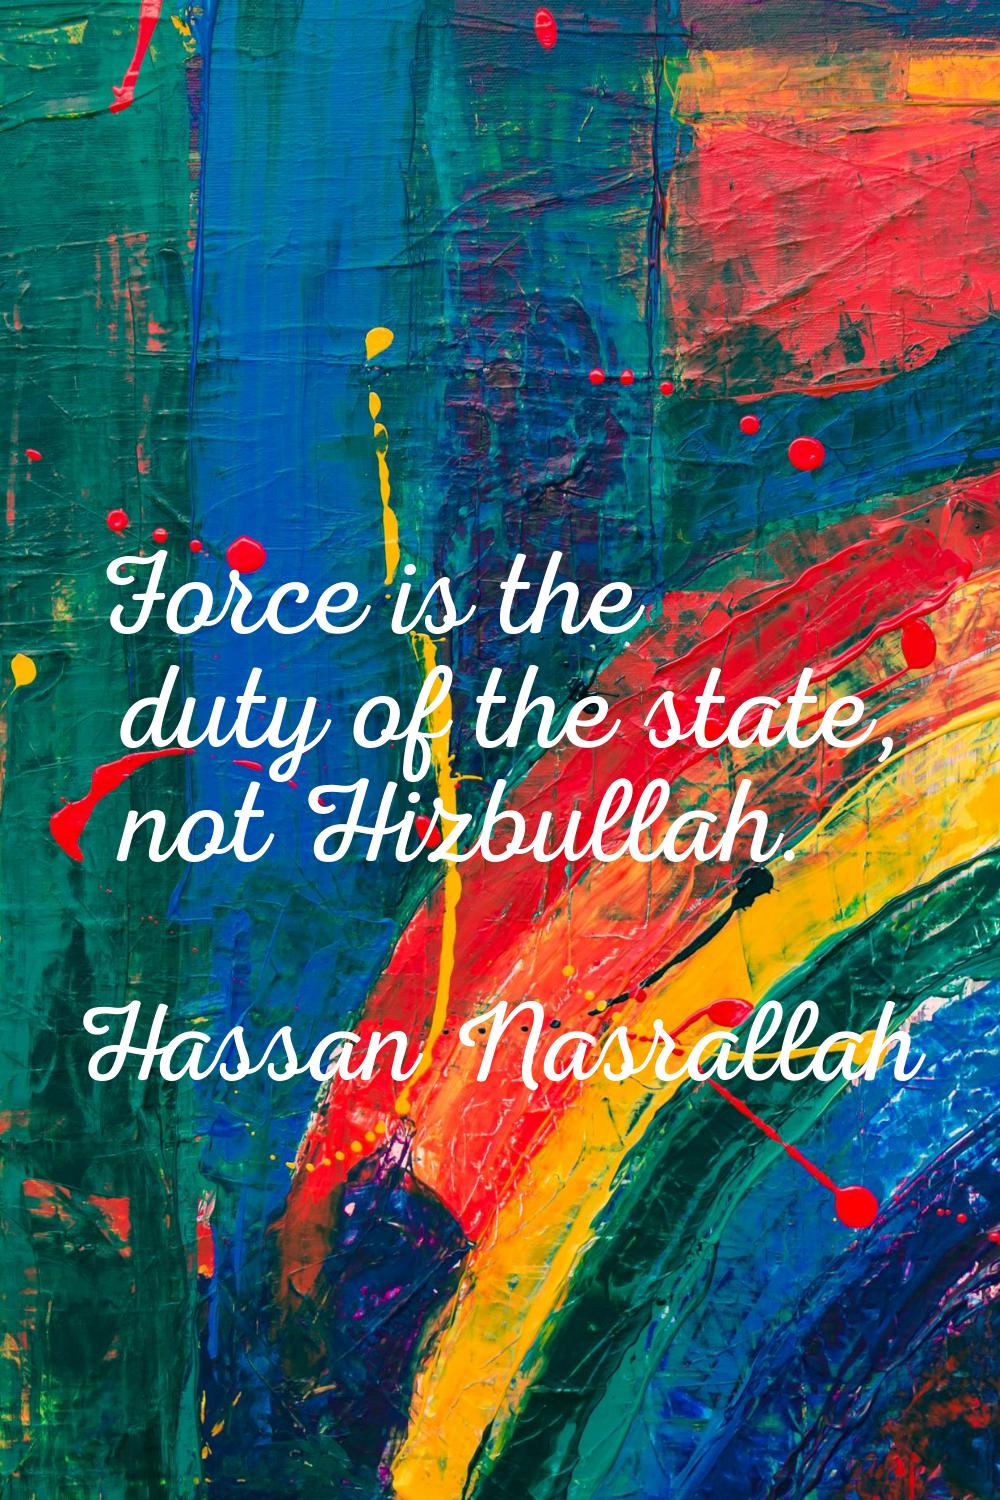 Force is the duty of the state, not Hizbullah.